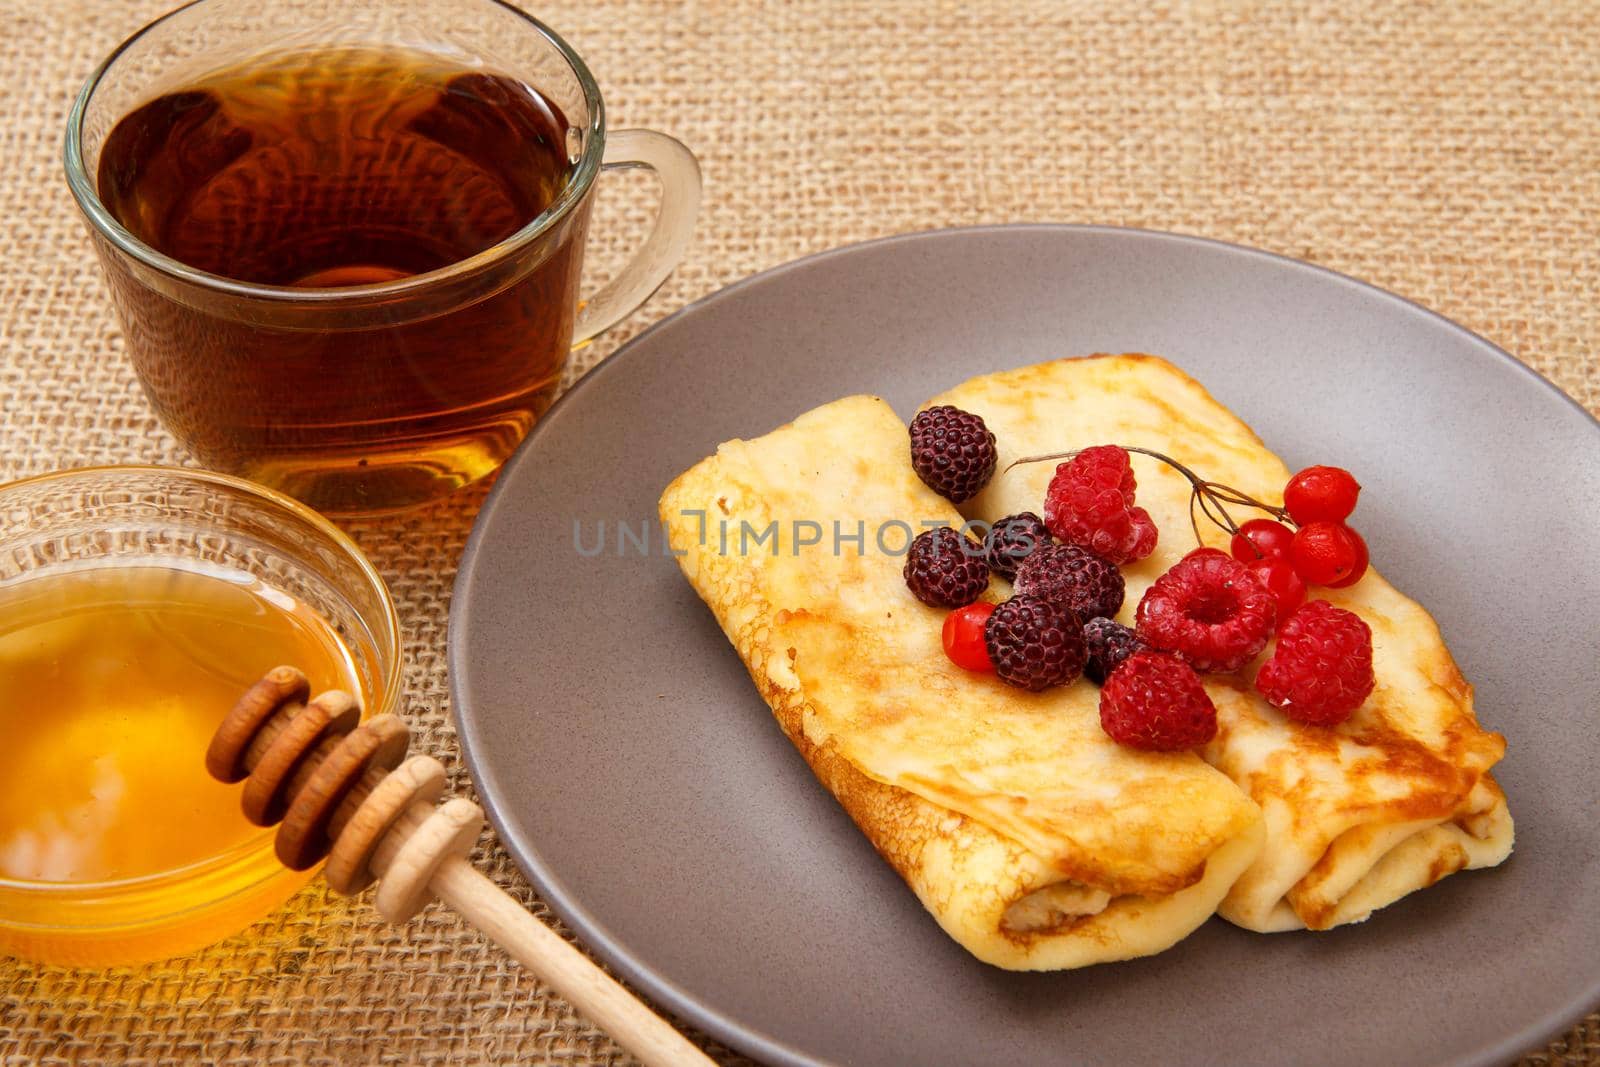 Homemade pancakes filled with cottage cheese and topped with frozen raspberries and blackberries on plate, cup of tea and honey in glass bowl with wooden spoon on sackcloth